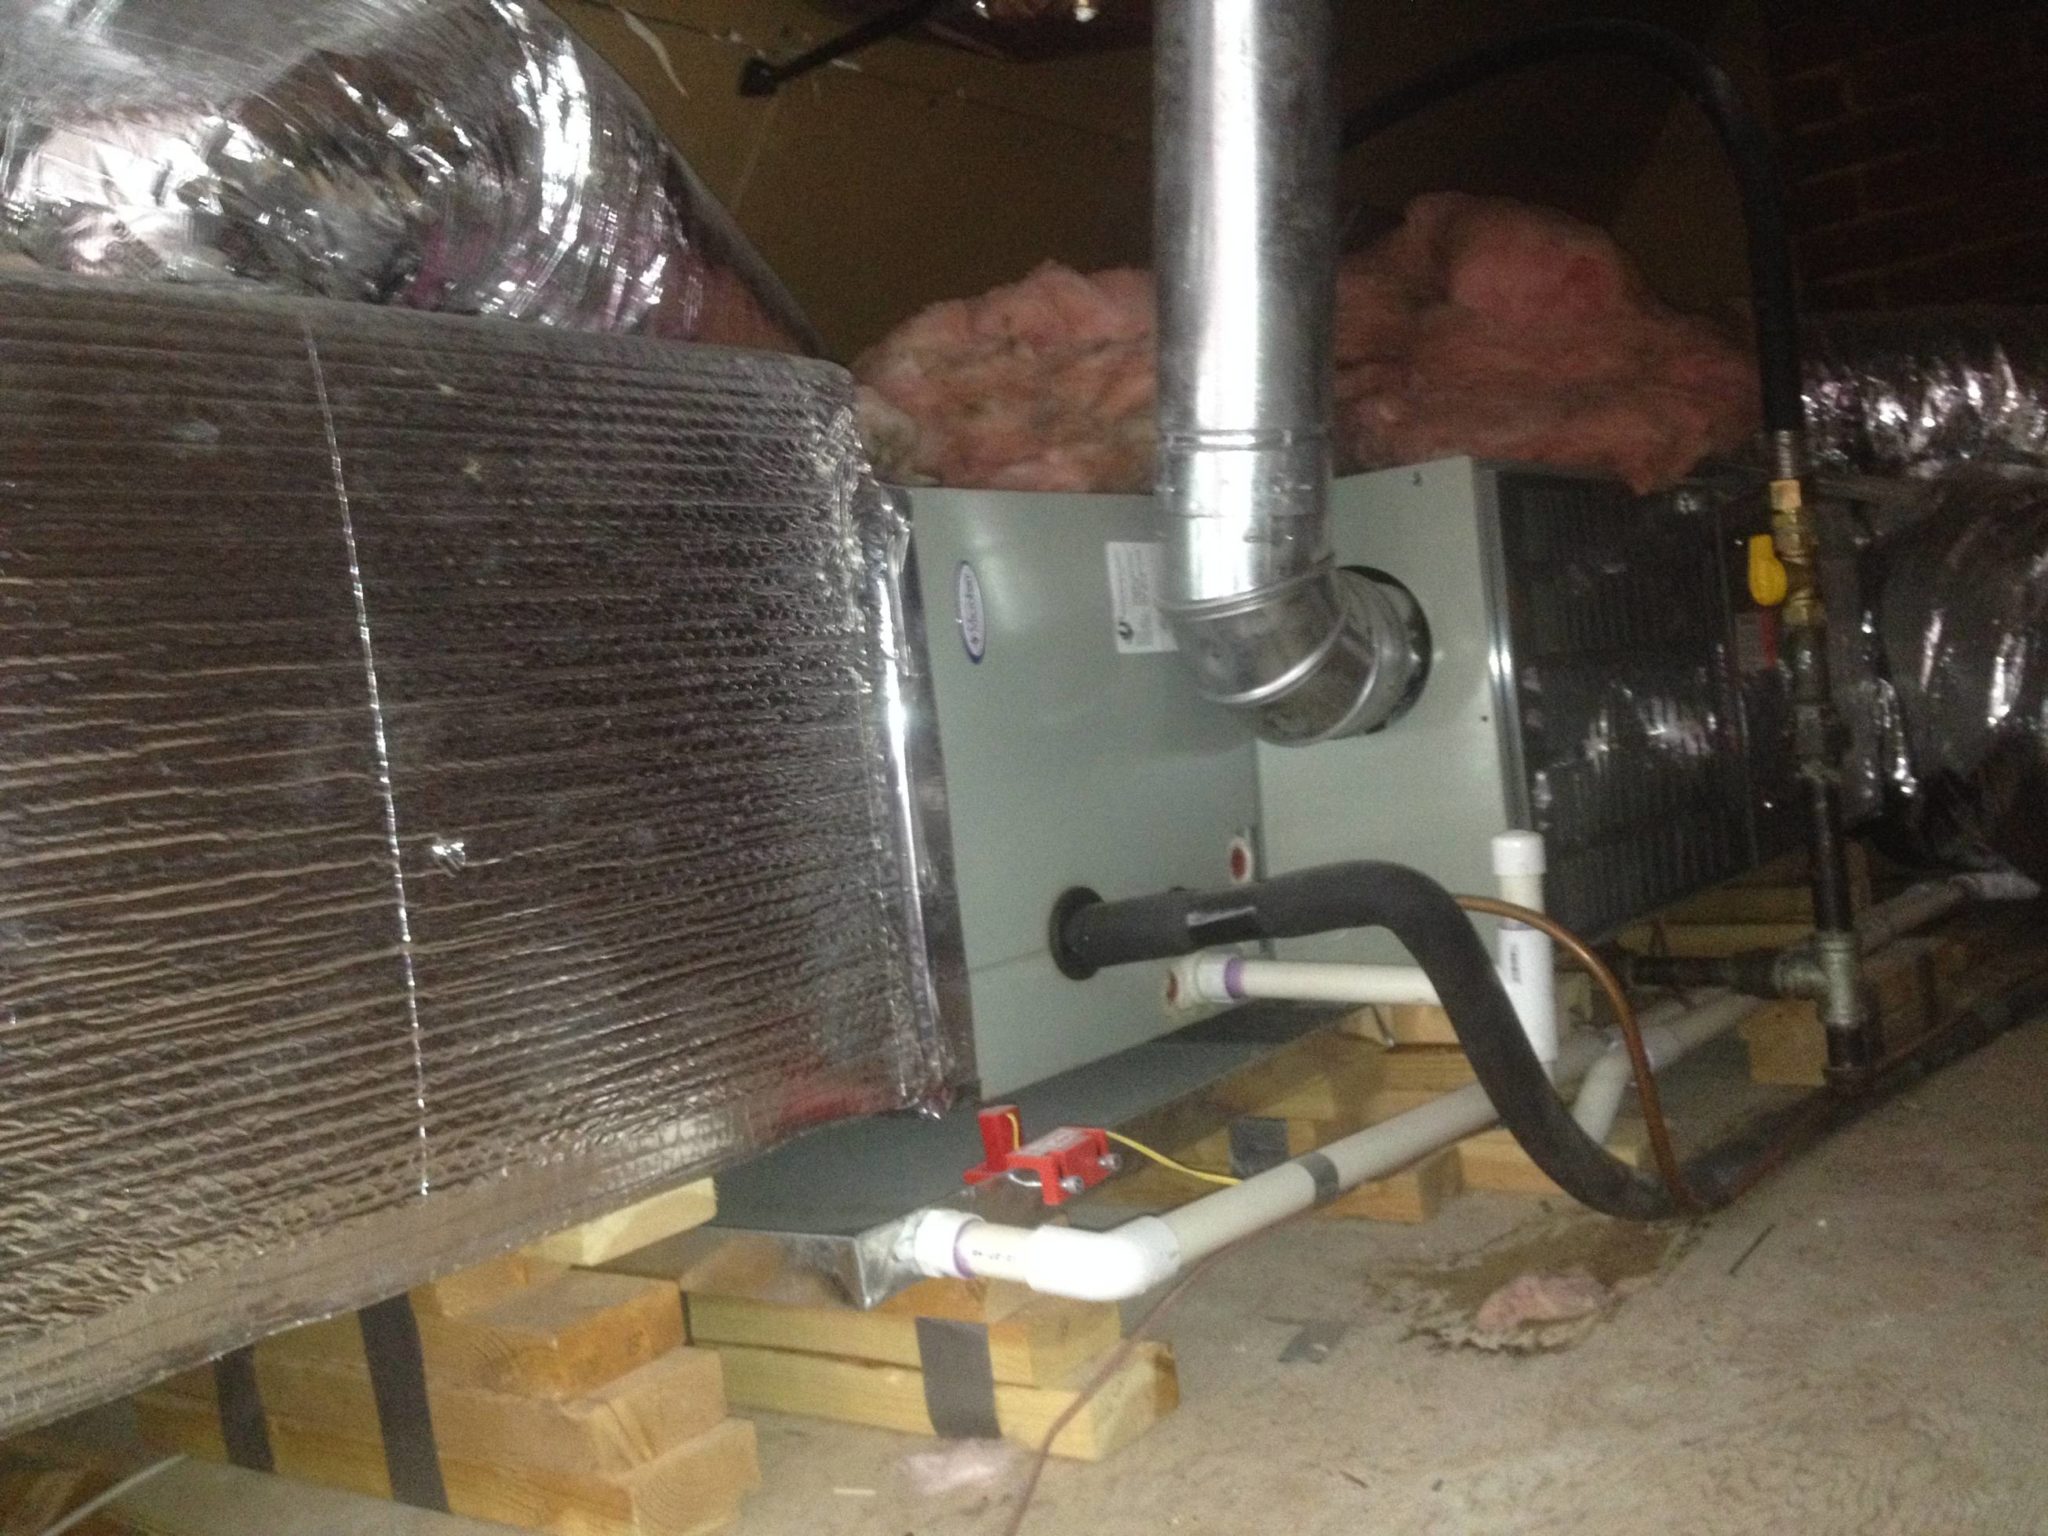 5 Things to Consider for a Crawl Space Dehumidifier - Ground Up Foundation Repair